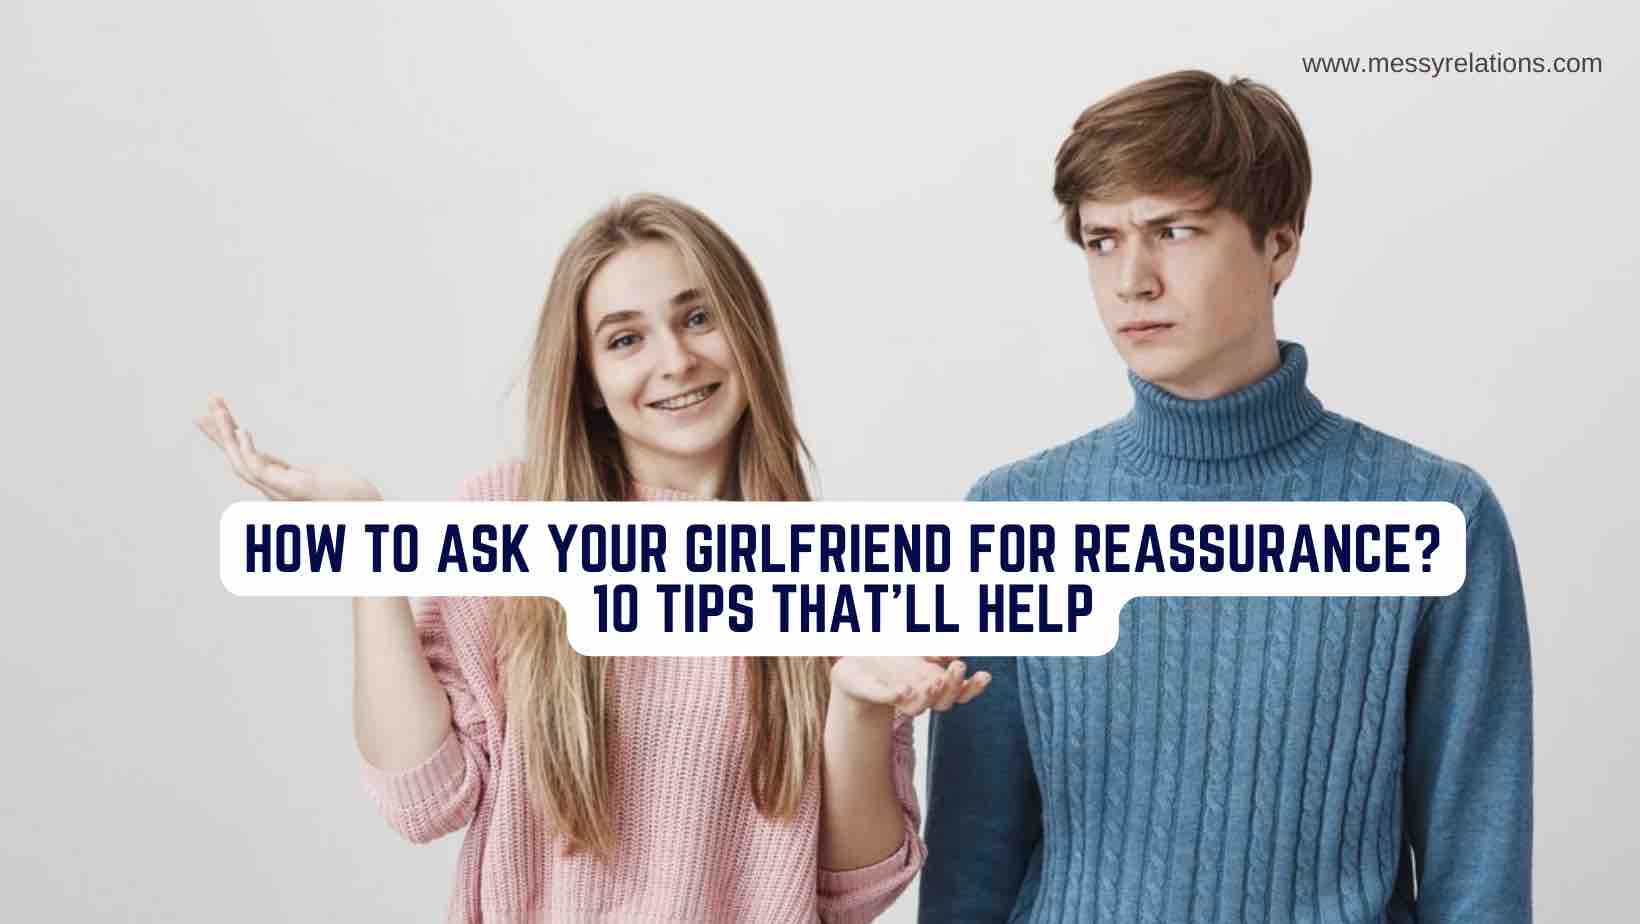 How to Ask Your Girlfriend for Reassurance?10 Tips That'll Help